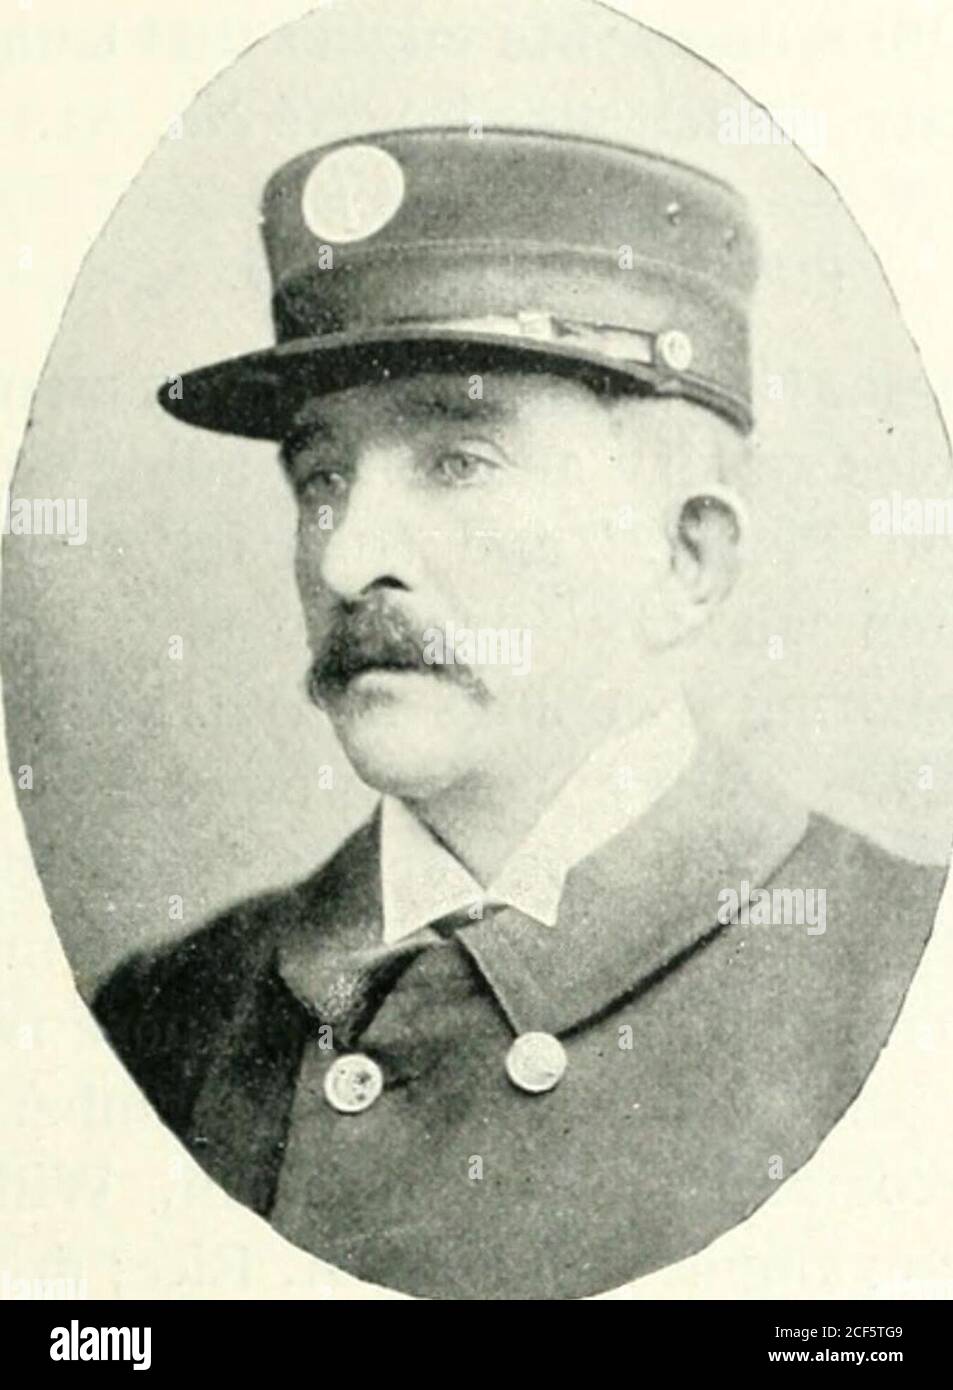 . The Exempt firemen of San Francisco; their unique and gallant record. CAPT. JAMES LAVDEN The captain is James Layden, who hasbeen in the Department since April i,1886. He is a native of San Francisco,and was born August 13, 1863. He be-came foreman of Engine No. 23, January20, 1898, after several promotions, enter-ing Engine No. 15 as hoseman, and after-wards to assistant foreman of Engine No.23, then to his present rank. The com-pany has the second-best record at theNorth Beach drill tower, i min.45 sec. The other members are : Lieutenant,Pat Barry; engineer, Chas. Hewitt;driver, J. J. McCa Stock Photo